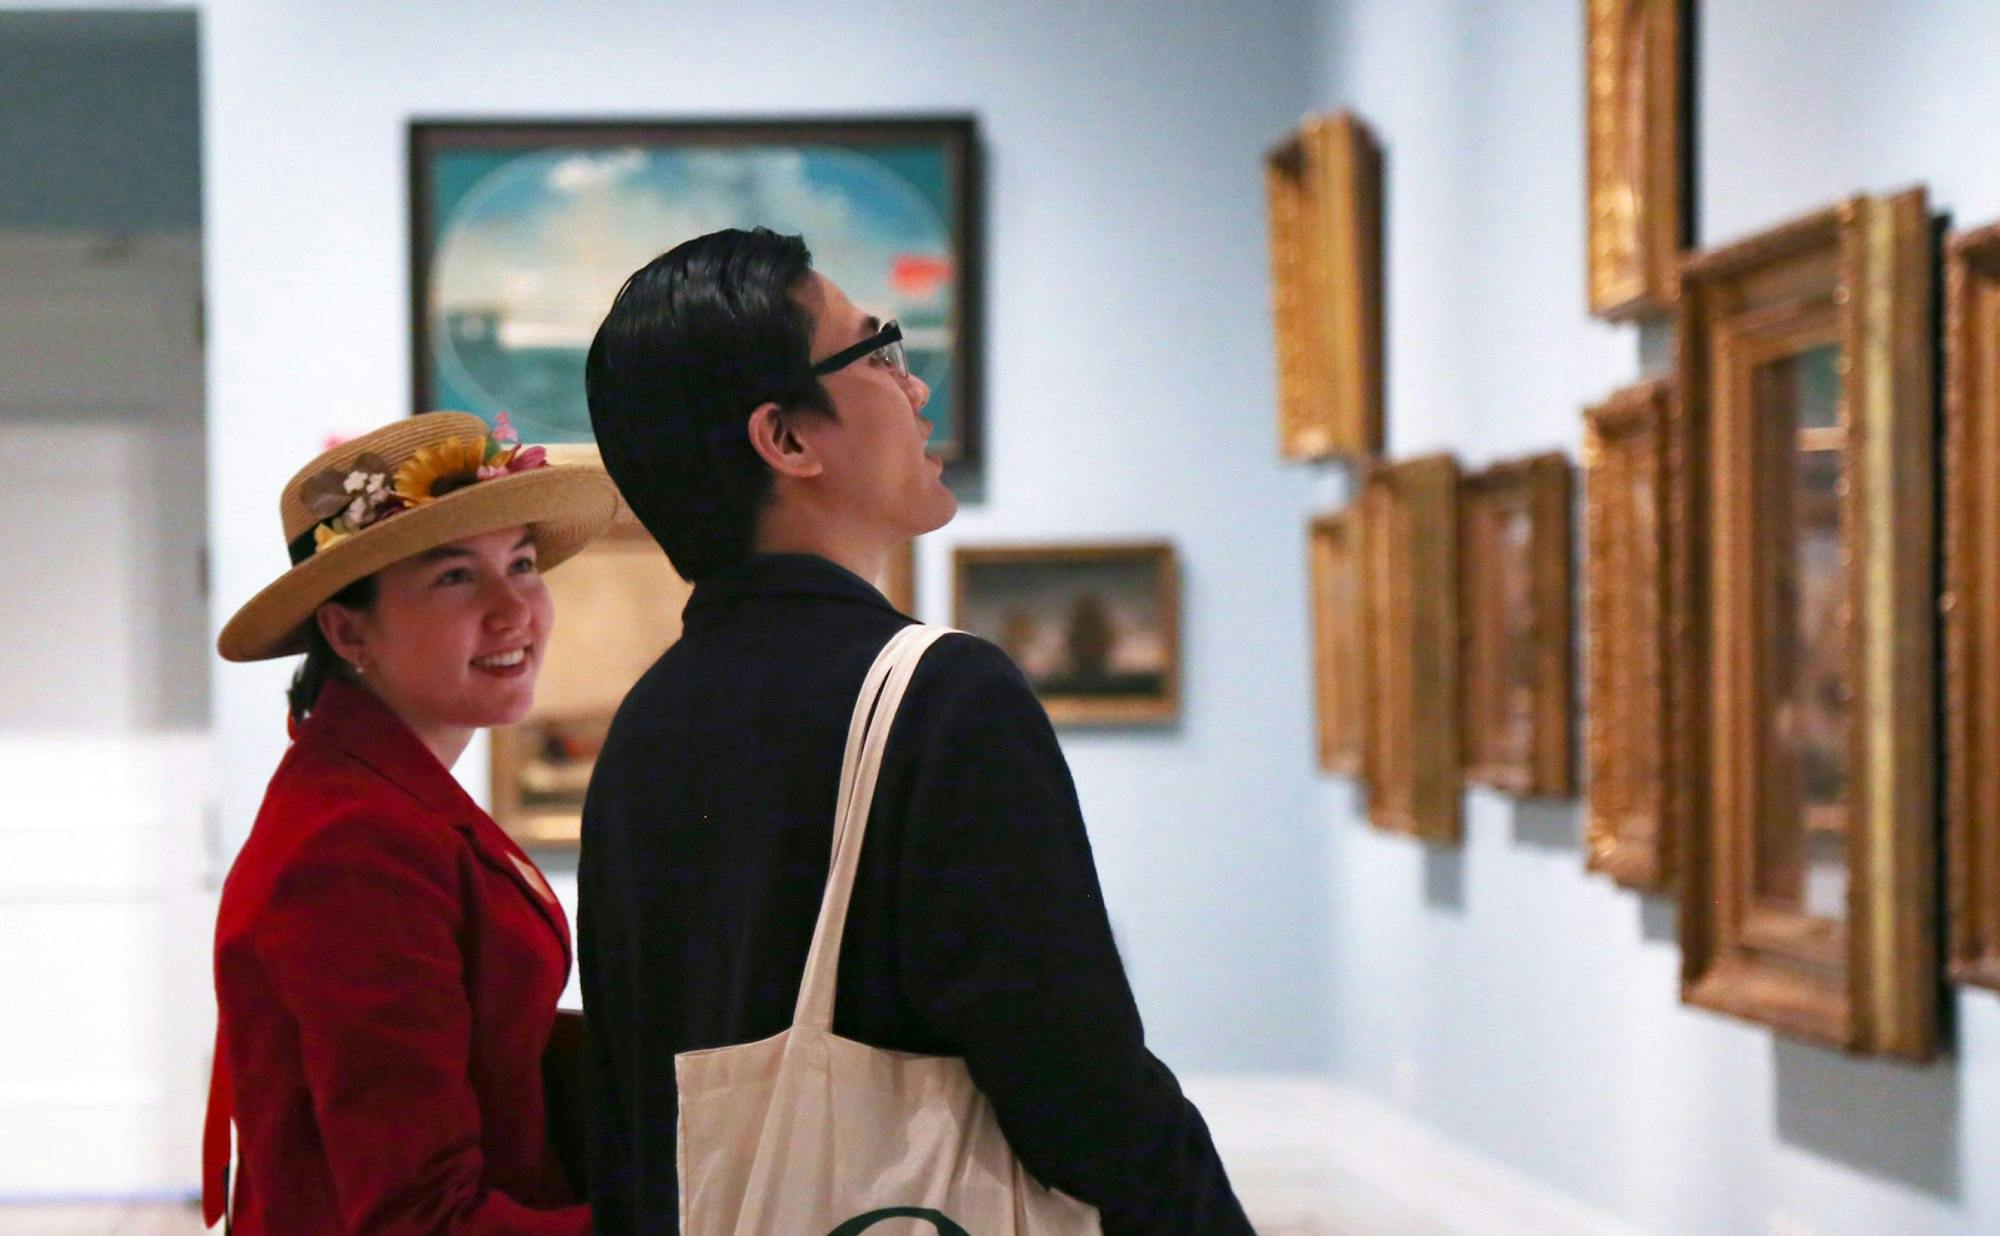 two museum visitors looking a gallery wall of framed artwork